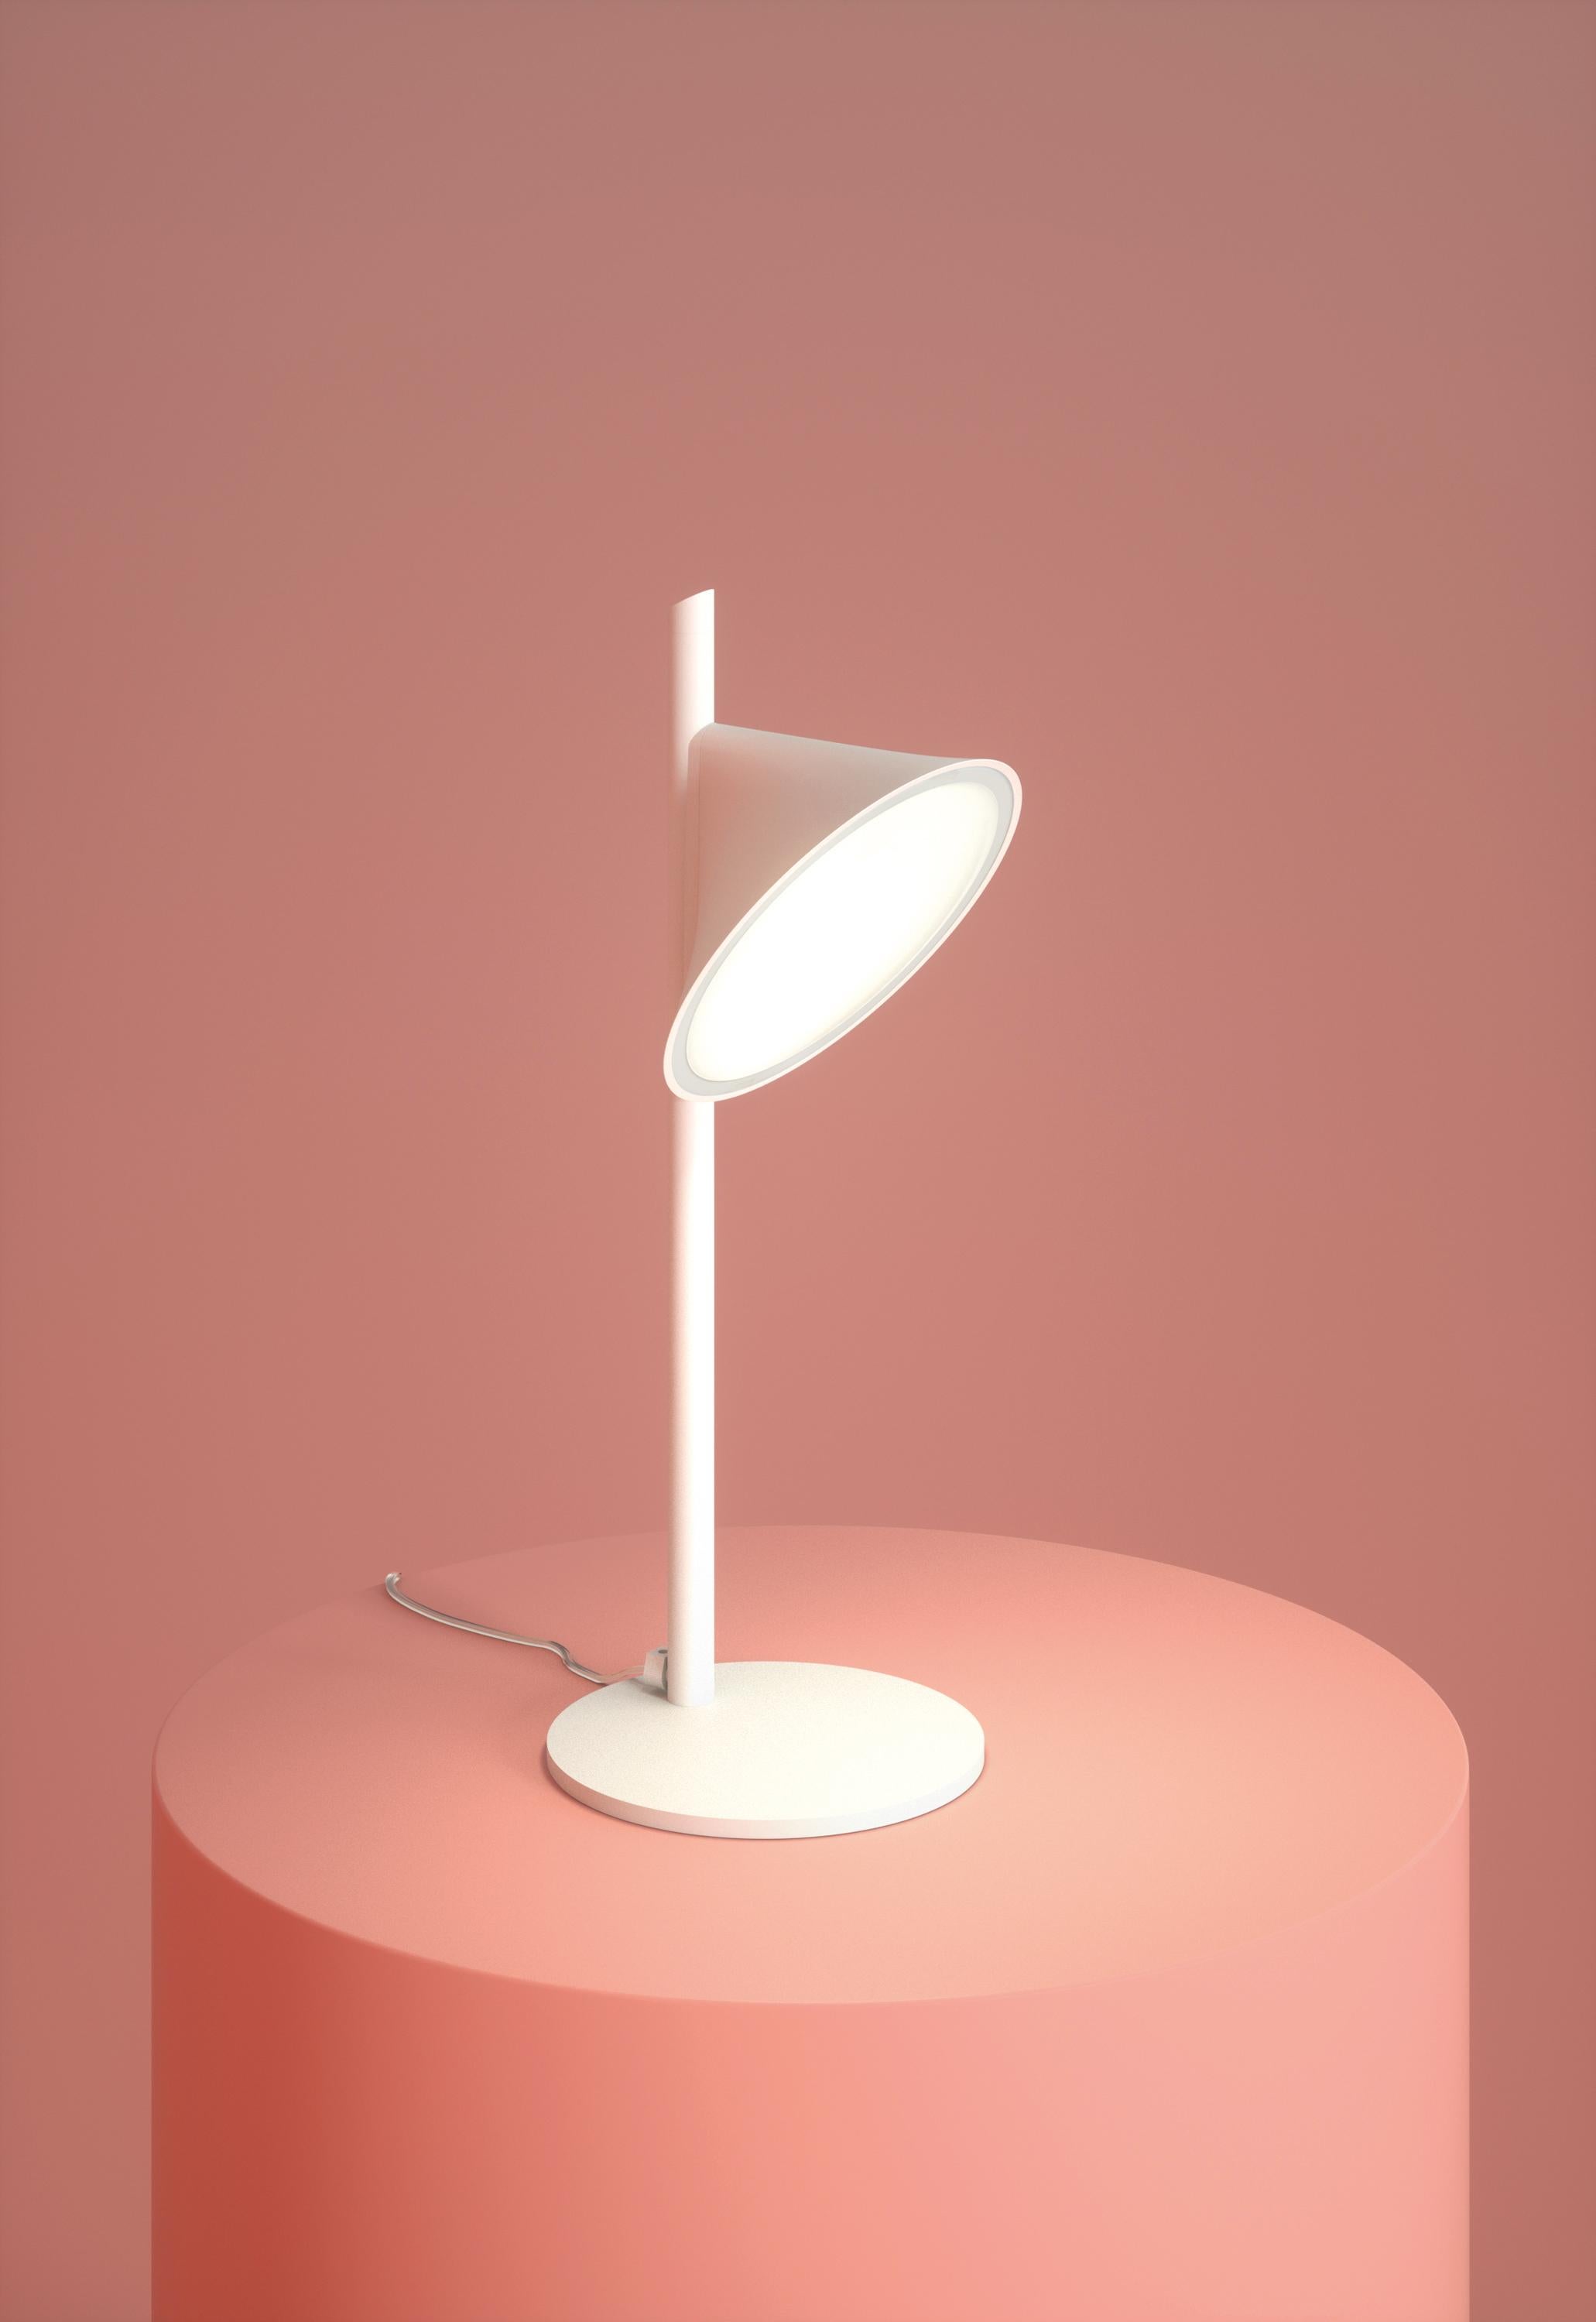 Painted Axolight Orchid Table Lamp with Aluminum Body in Sand by Rainer Mutsch For Sale